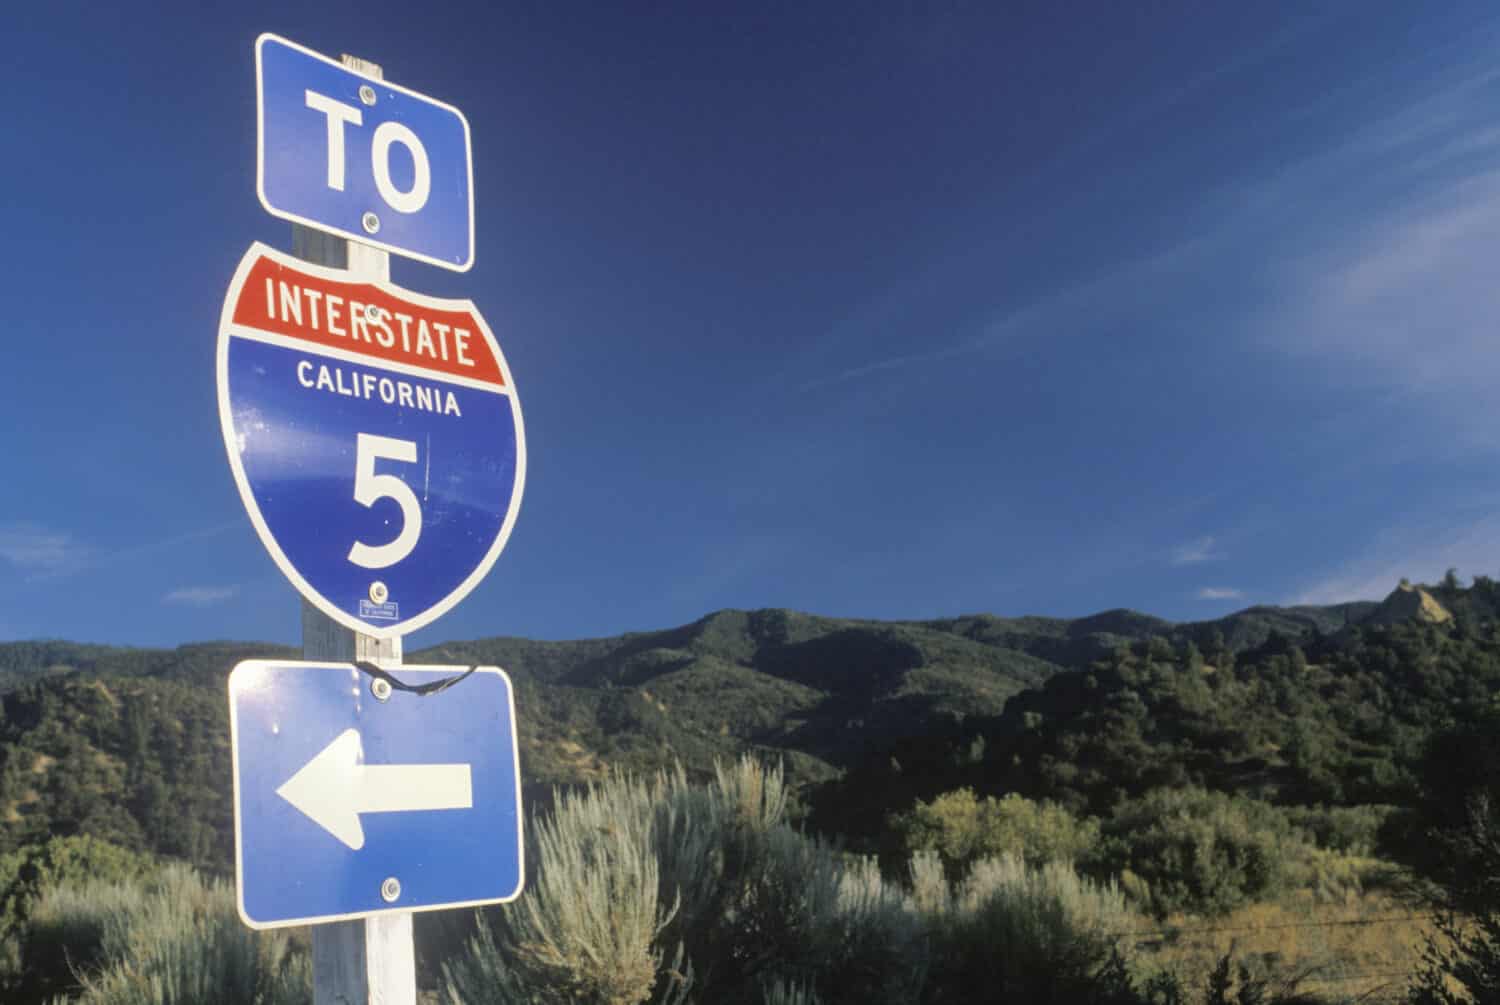 A sign for Interstate 5 in California